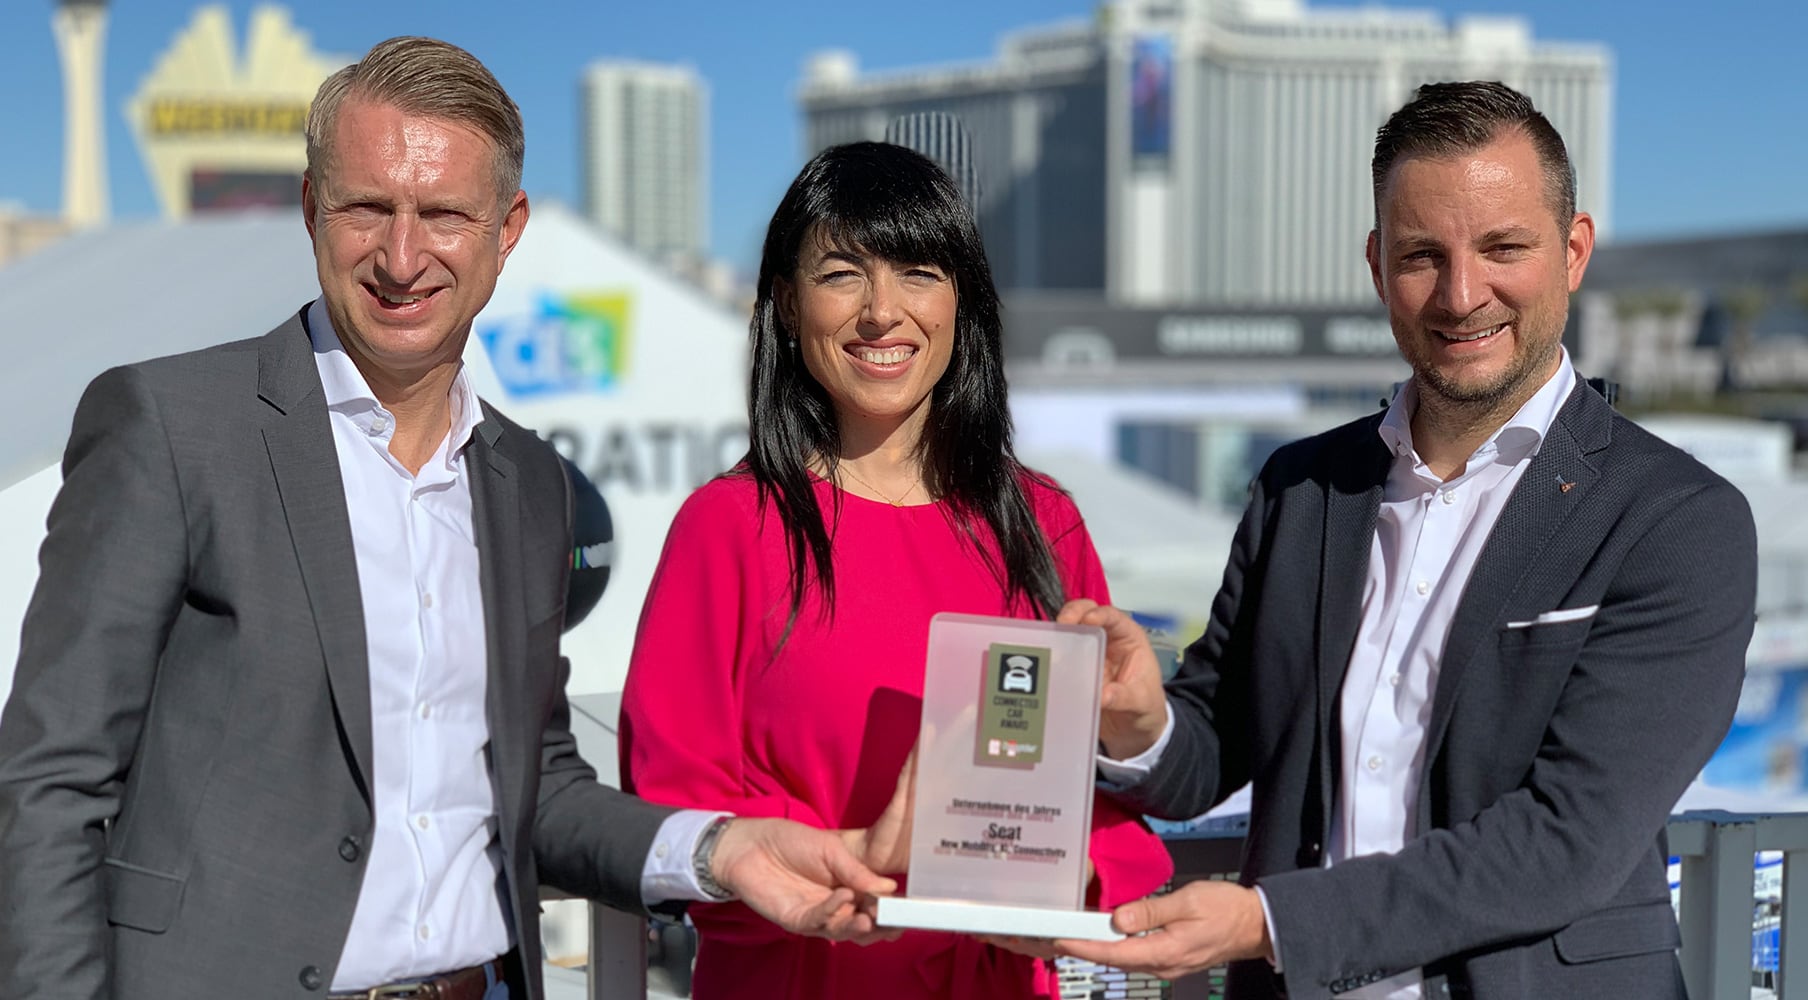 SEAT wins CES Company of the Year award